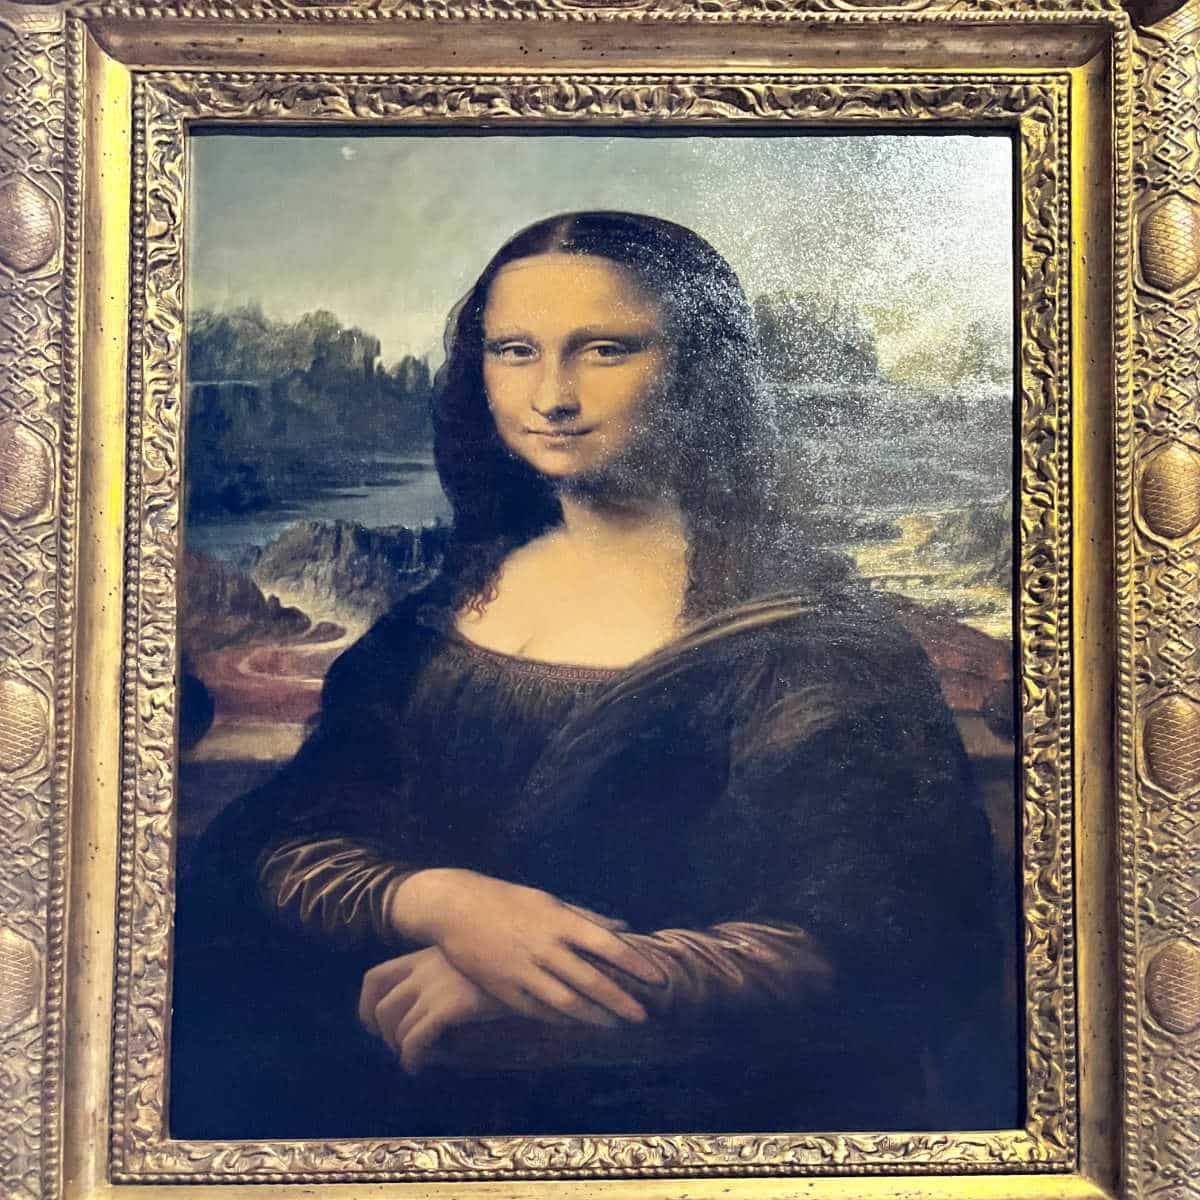 You are currently viewing 12 Interesting Facts about Leonardo da Vinci’s Mona Lisa